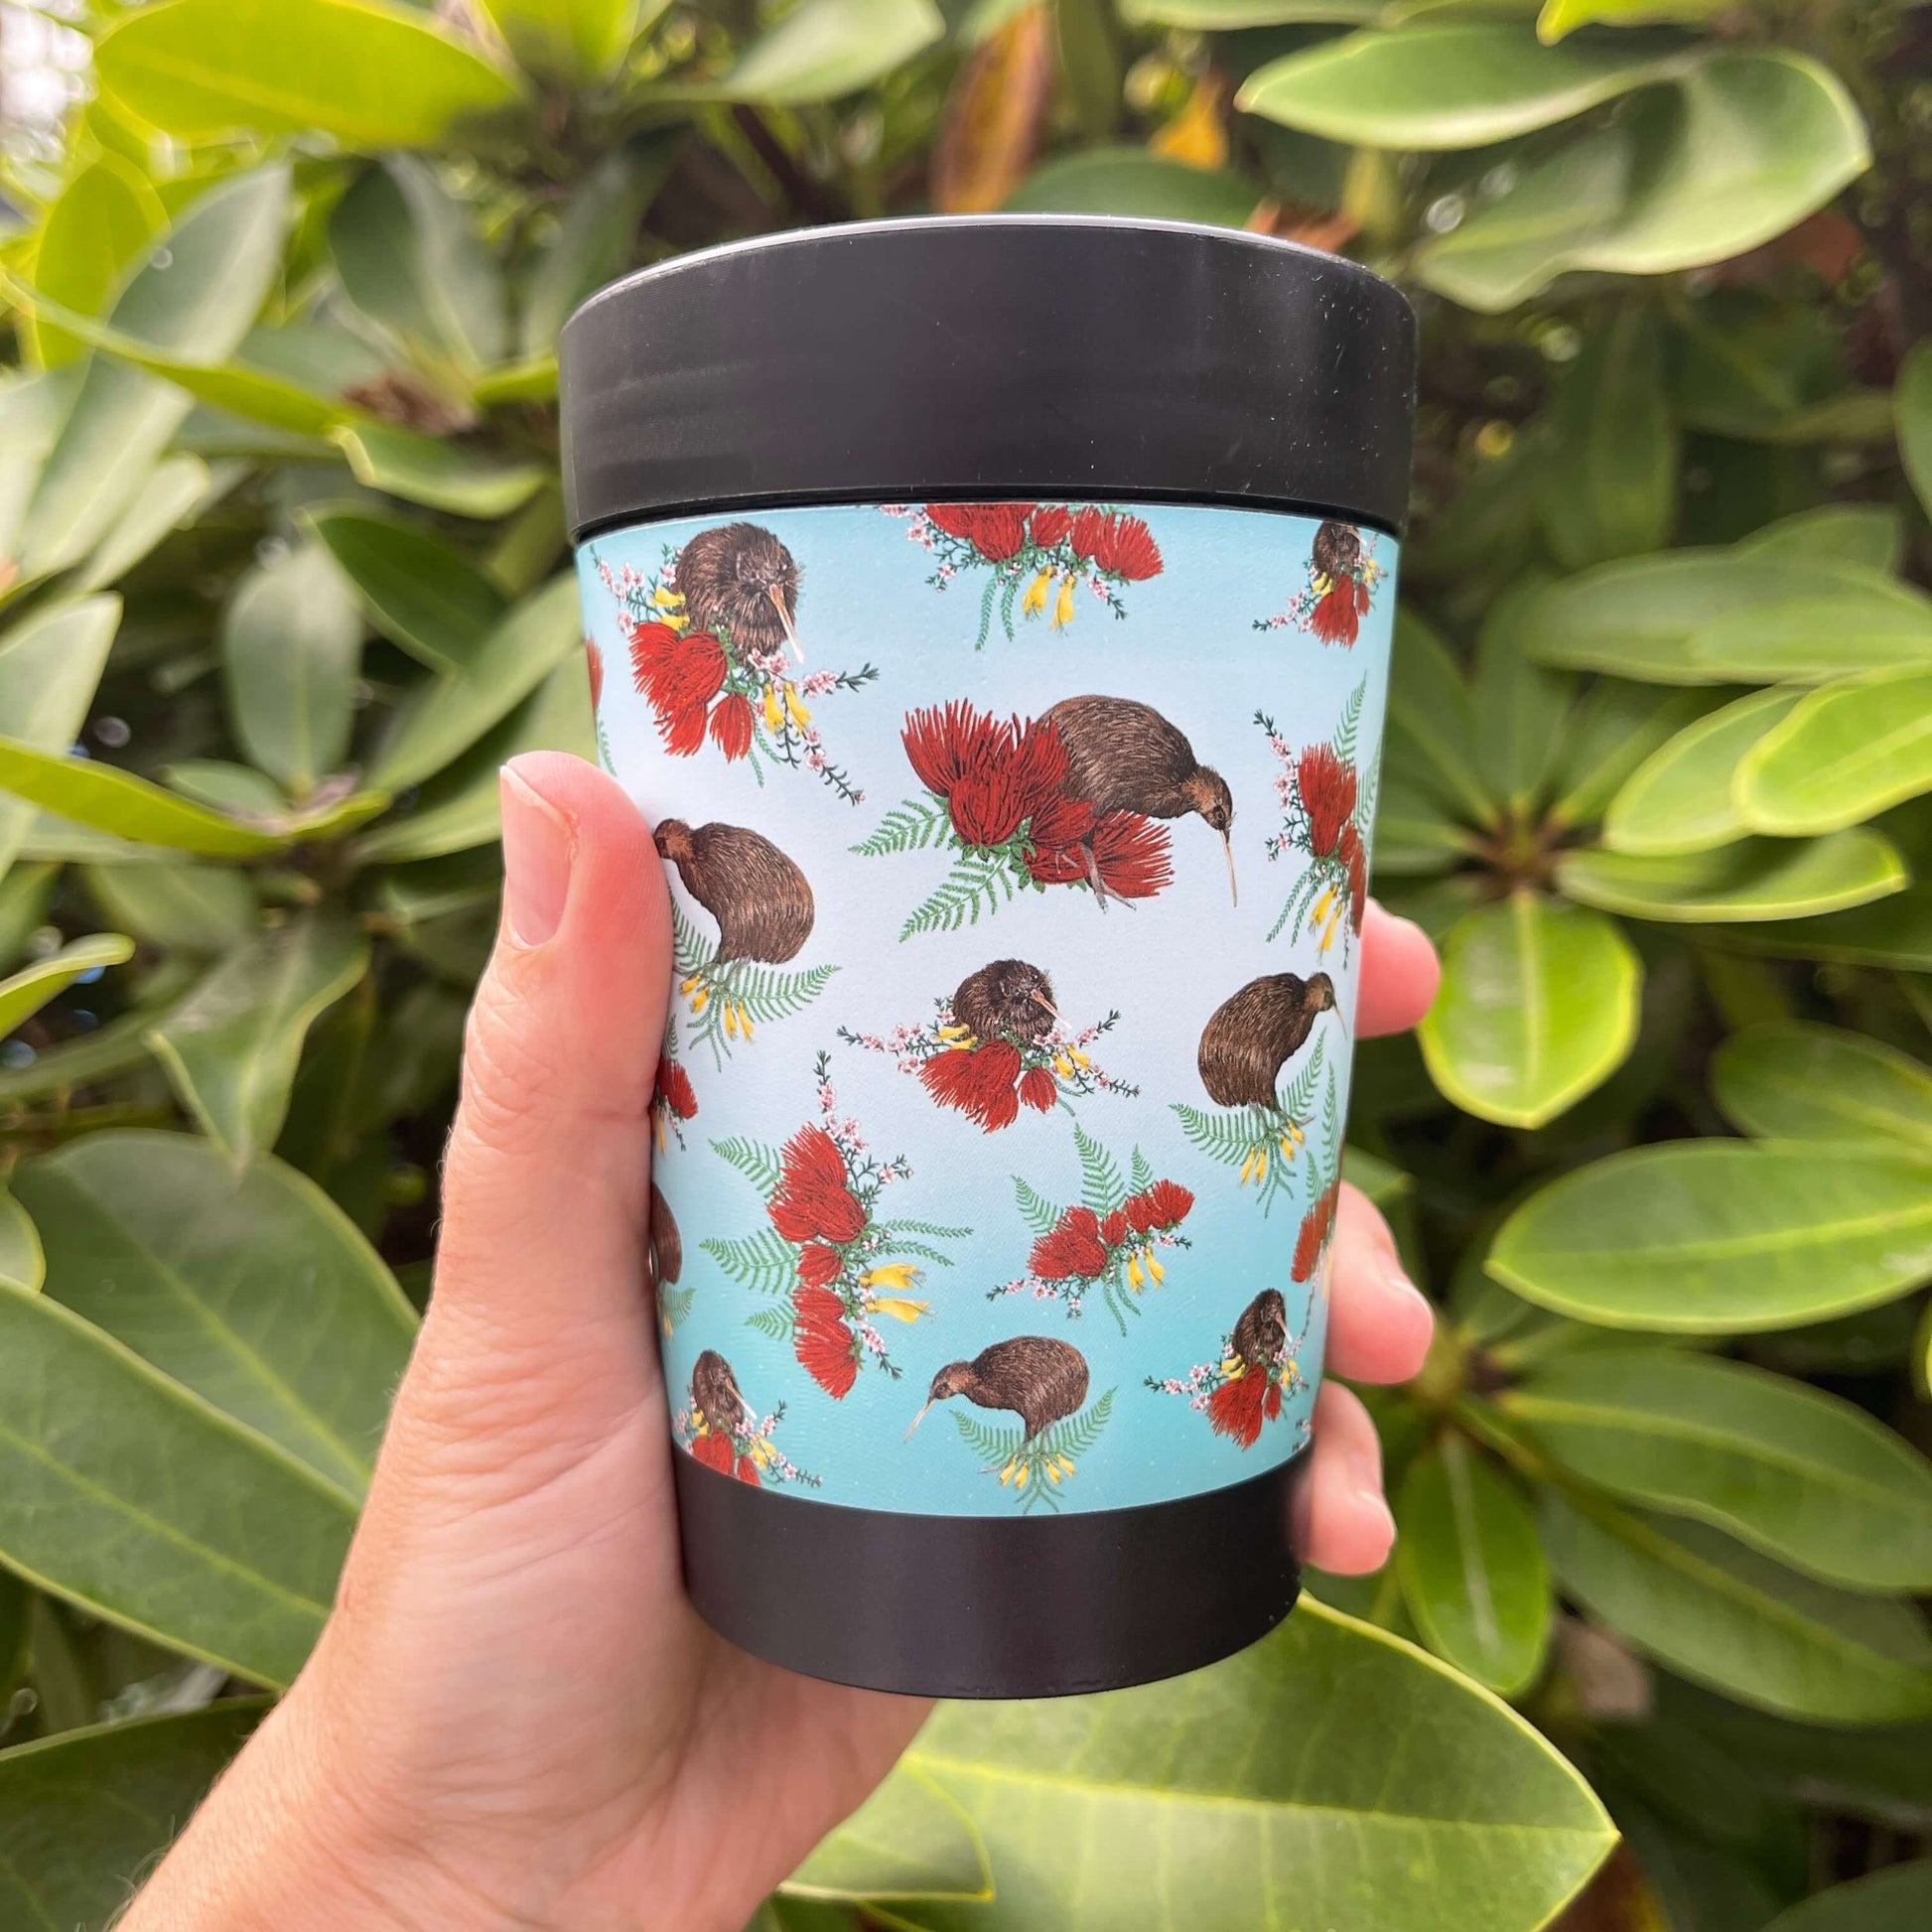 Black reusable coffee cup with blue ombre wrap featuring Kiwi birds and bunches of Pohutukawa flowers, Kowhai flowers and Ferns.